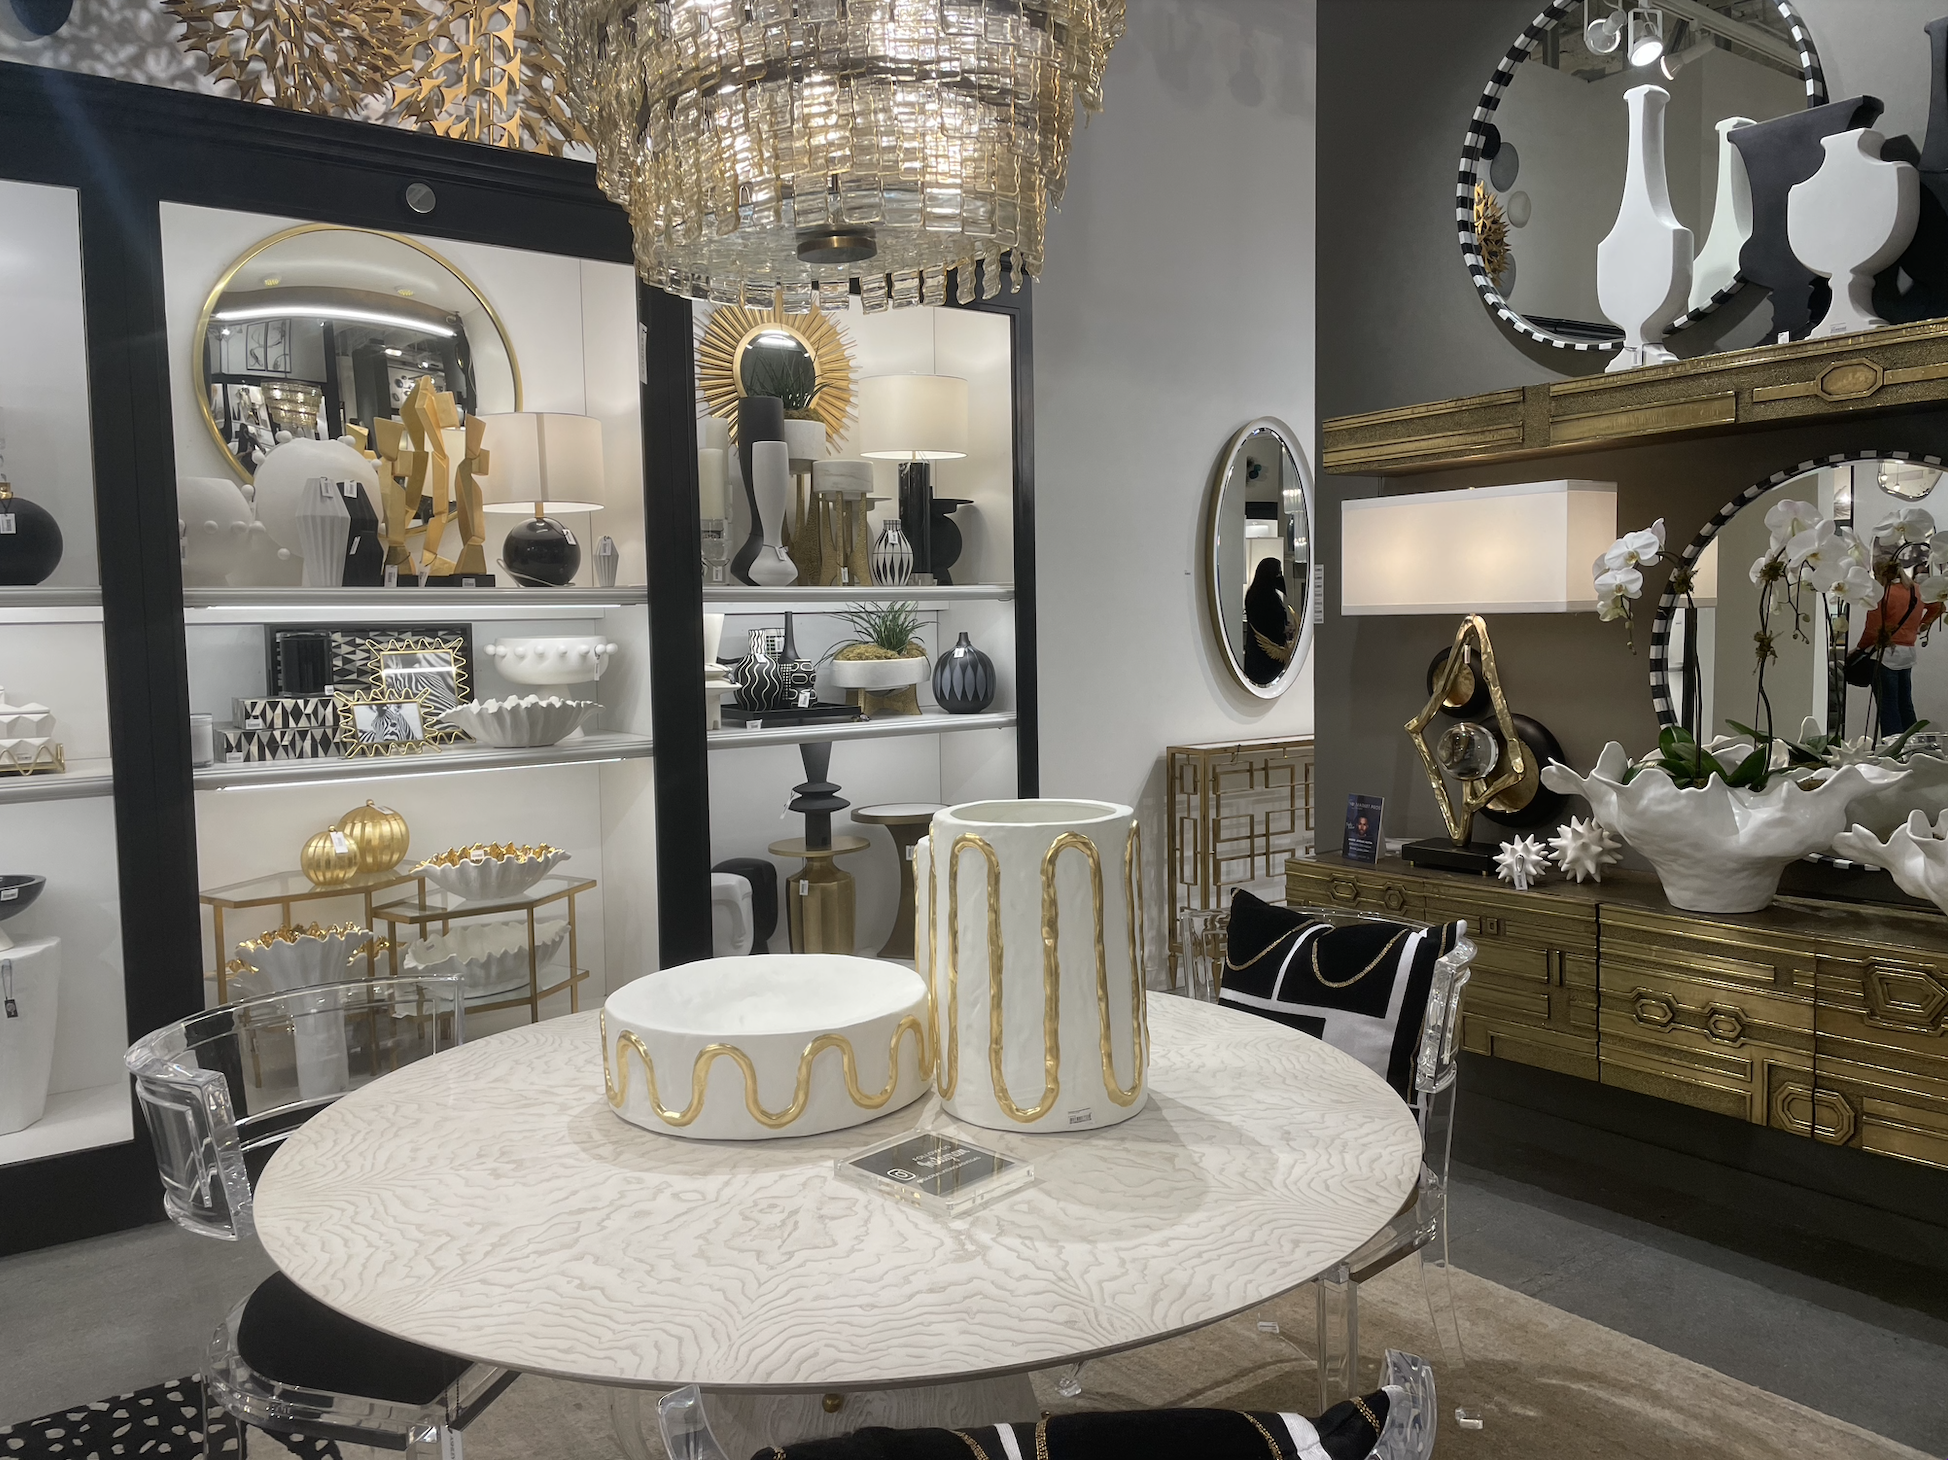 Decadent golds and warm yellows were in high demand this market, as shown here in the Global Views showroom. 